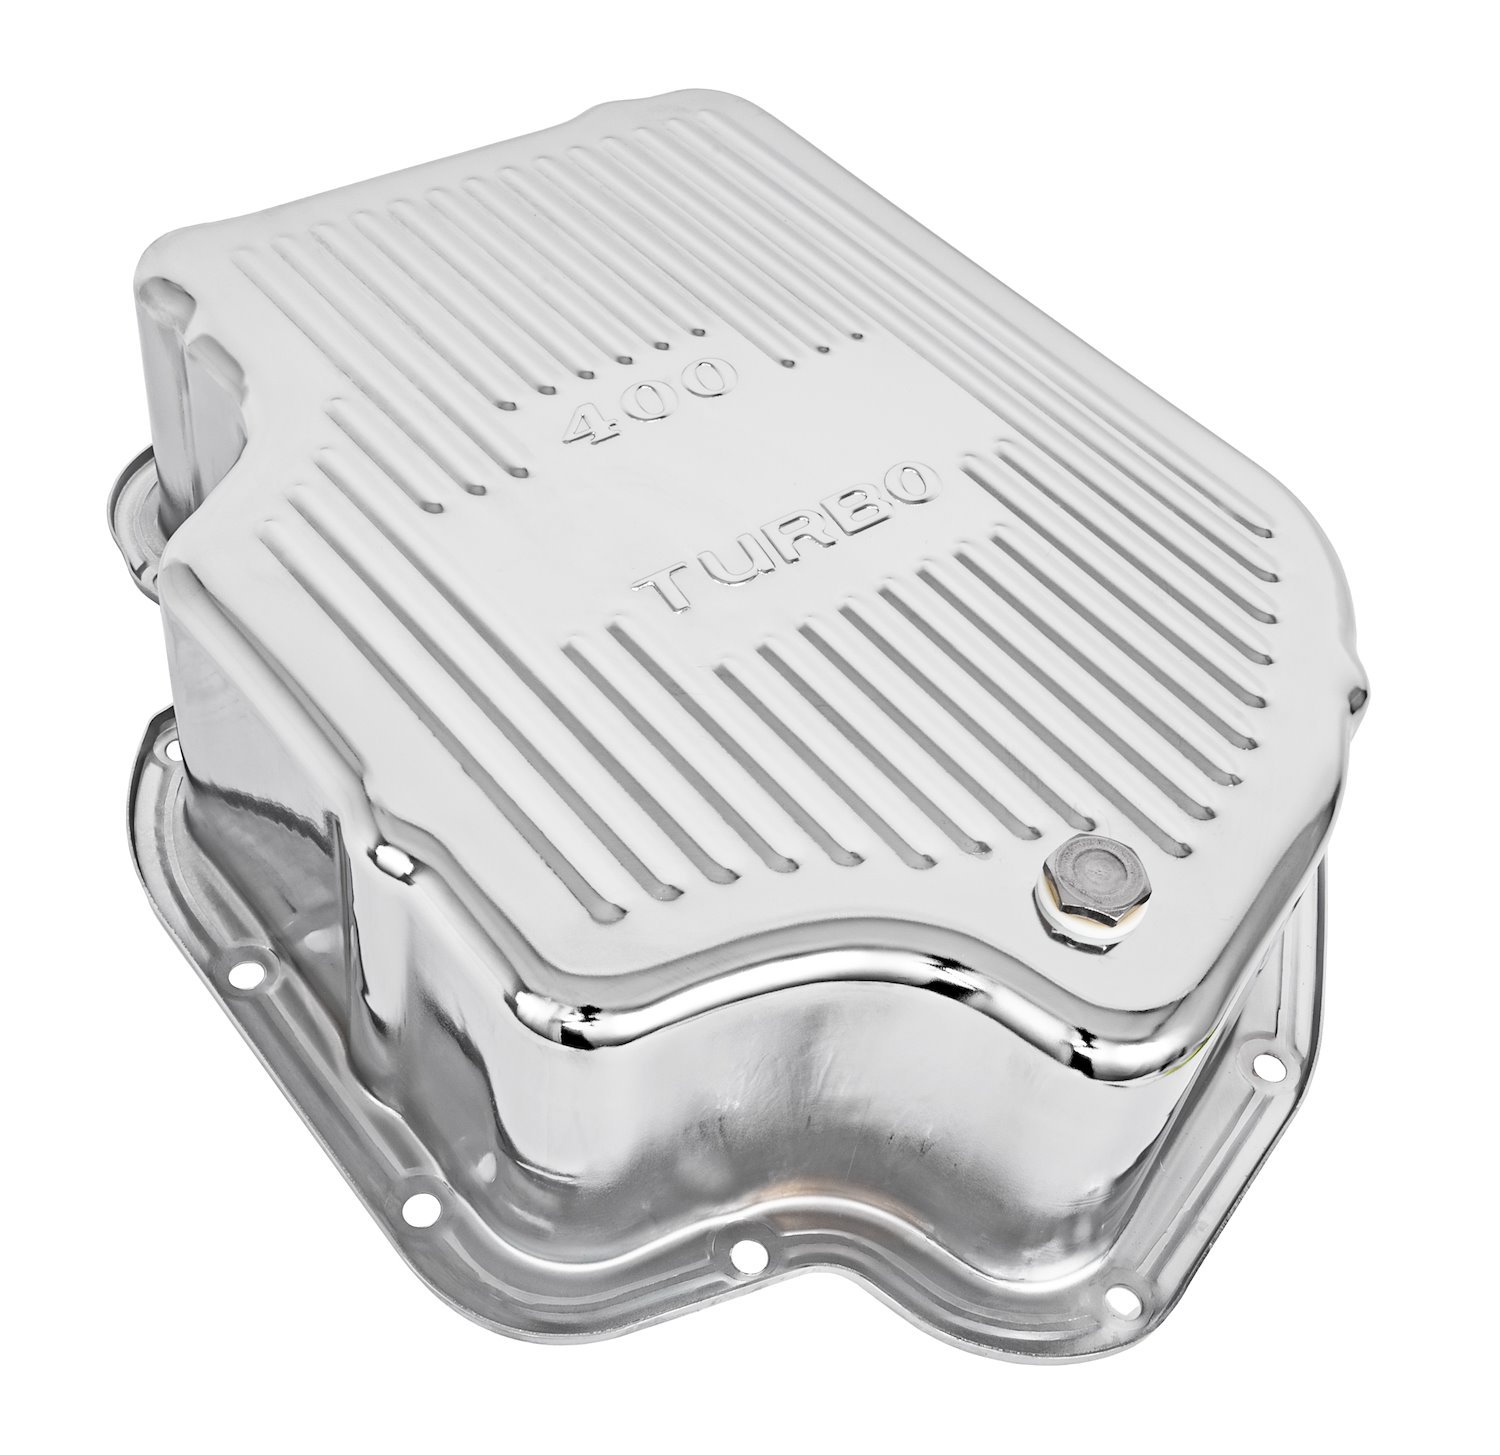 Automatic Transmission Pan for GM TH400, 4 in. Deep w/Extra Capacity [Chrome Plated Steel]